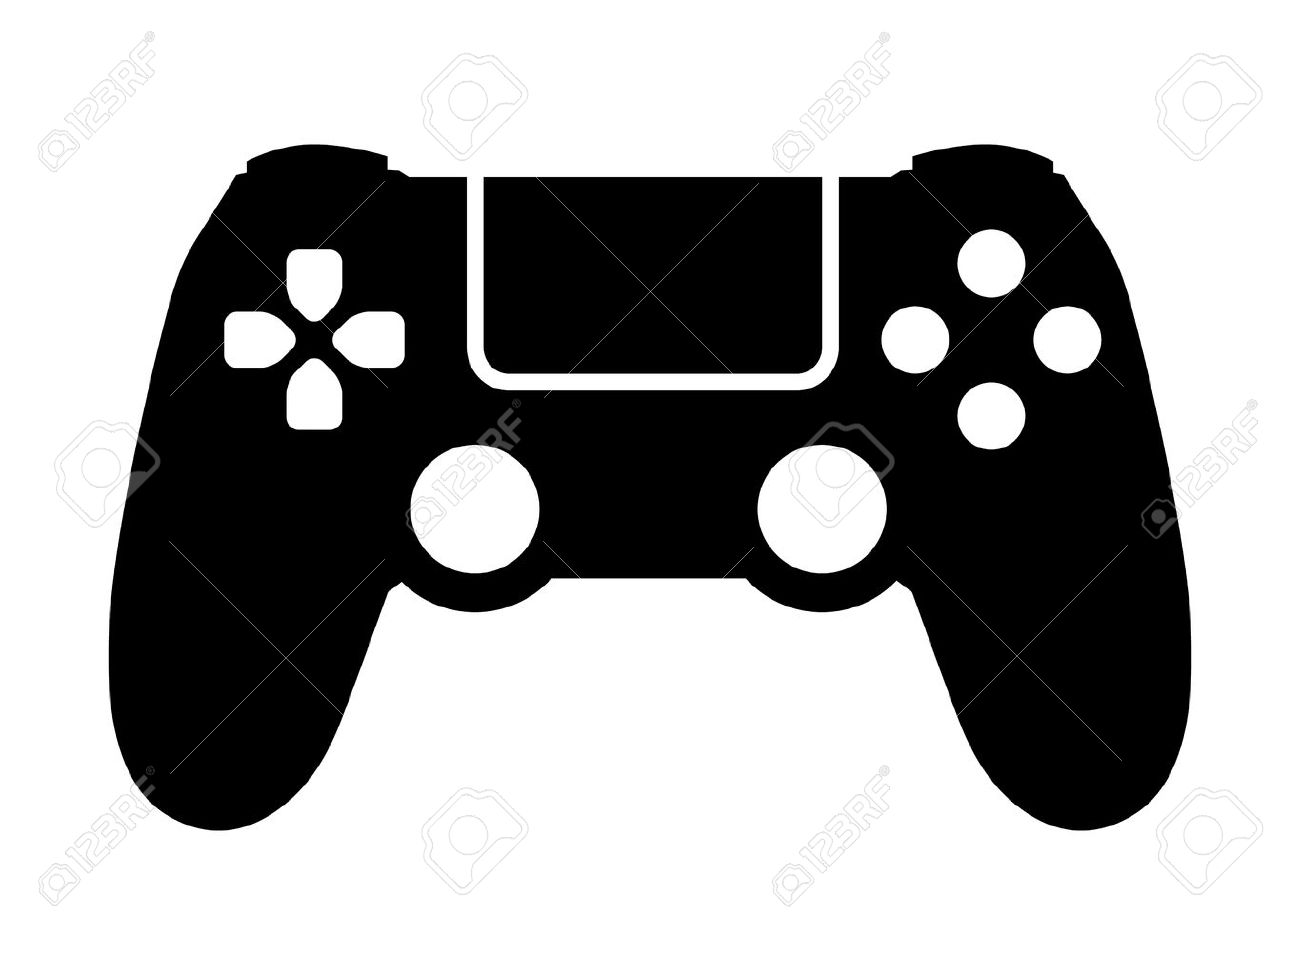 Vector - Video game controller / gamepad flat icon for apps and websites